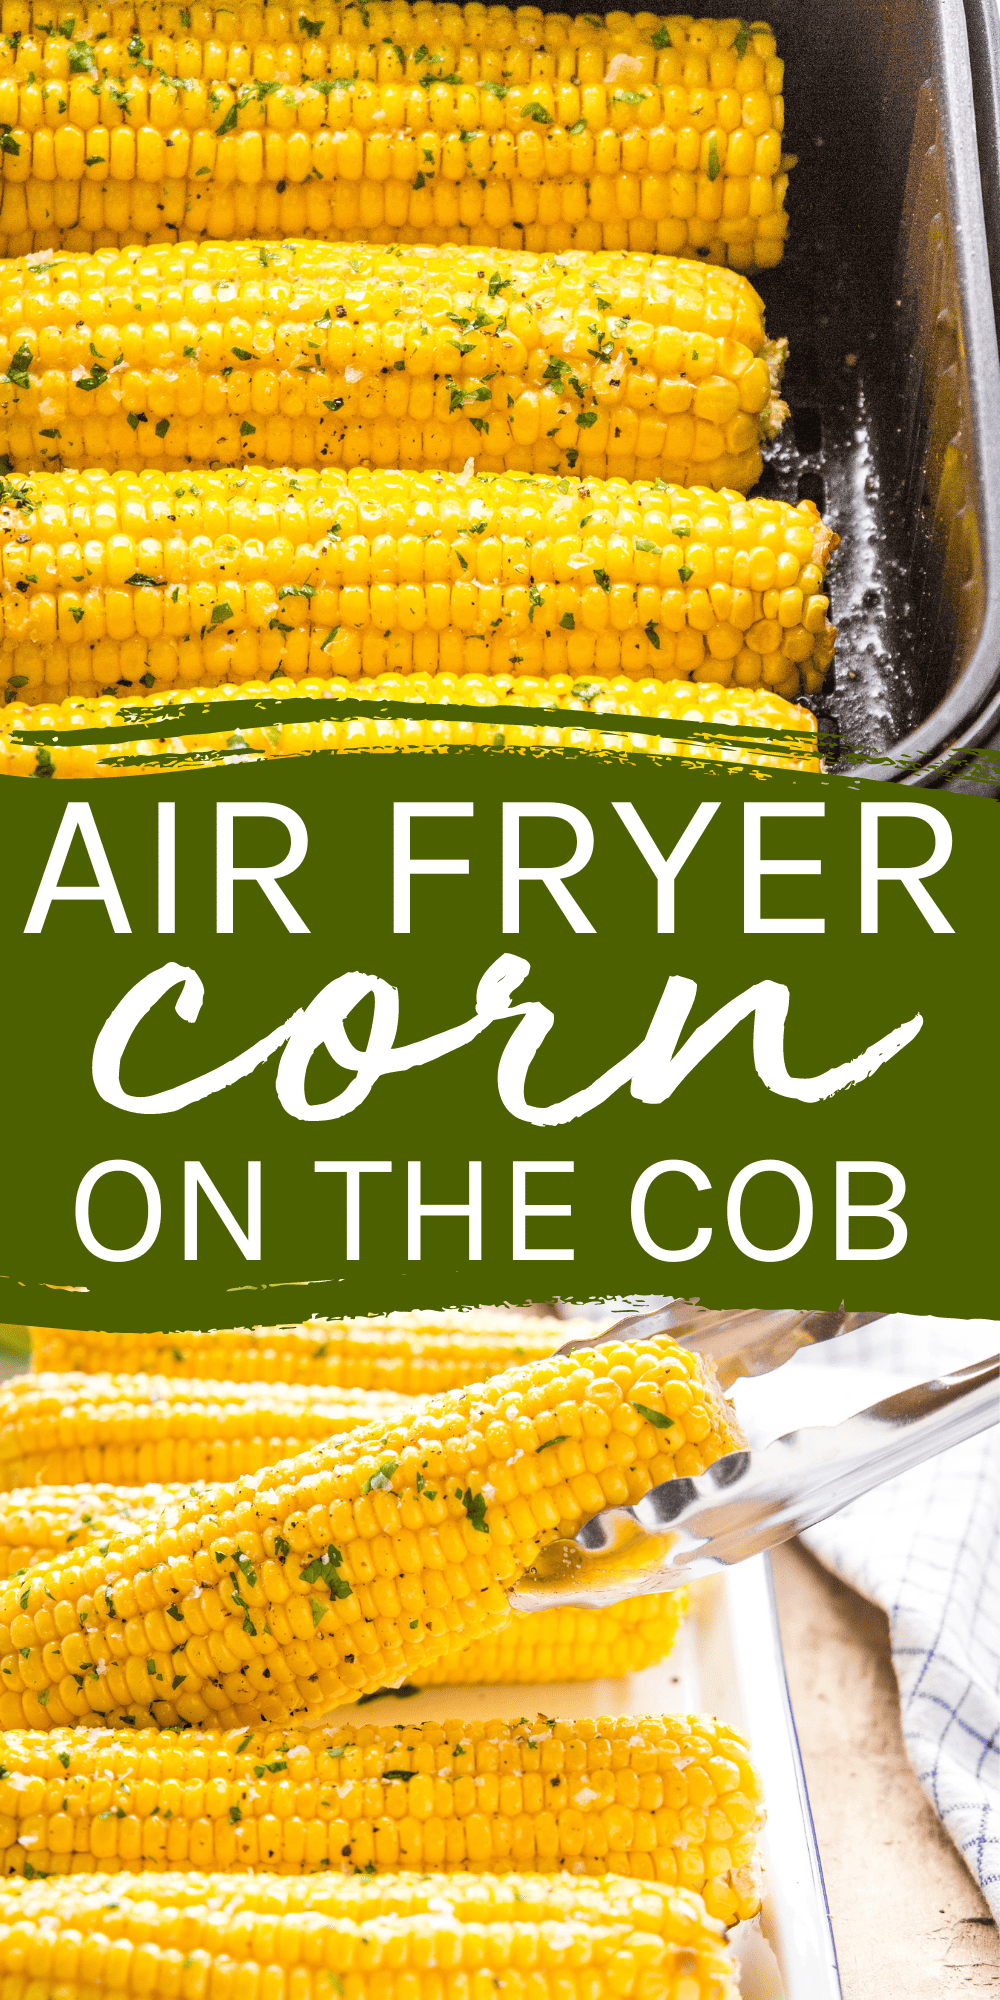 This Air Fryer Corn on the Cob recipe is the easiest way to cook fresh corn on the cob! Perfectly tender corn on the cob every single time, basic ingredients & ready in 10 minutes or less! You'll never boil corn on the cob again! Recipe from thebusybaker.ca! #cornonthecob #howtocookcornonthecob #airfryerrecipe #airfryercornonthecob #airfryercorn #cornonthecobrecipe #sidedish #summerrecipe #corn via @busybakerblog